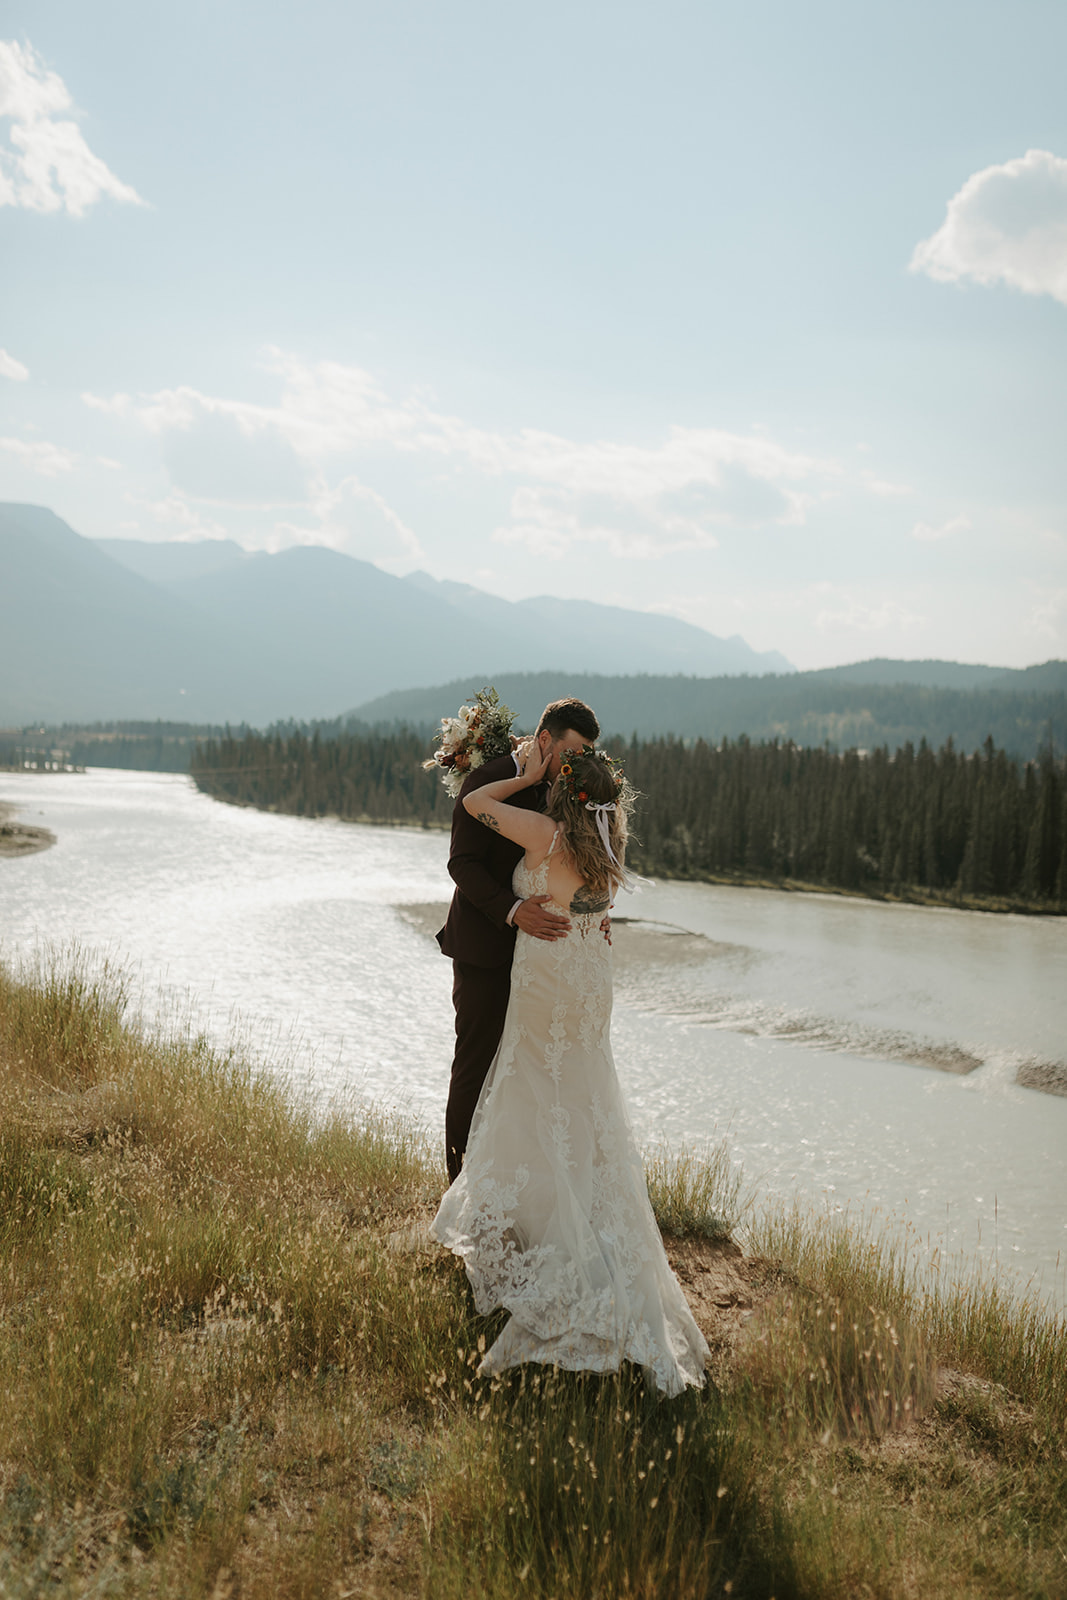 Bride and groom embracing with a mountain landscape in the background alongside the Athabasca Rive in Jasper, Alberta